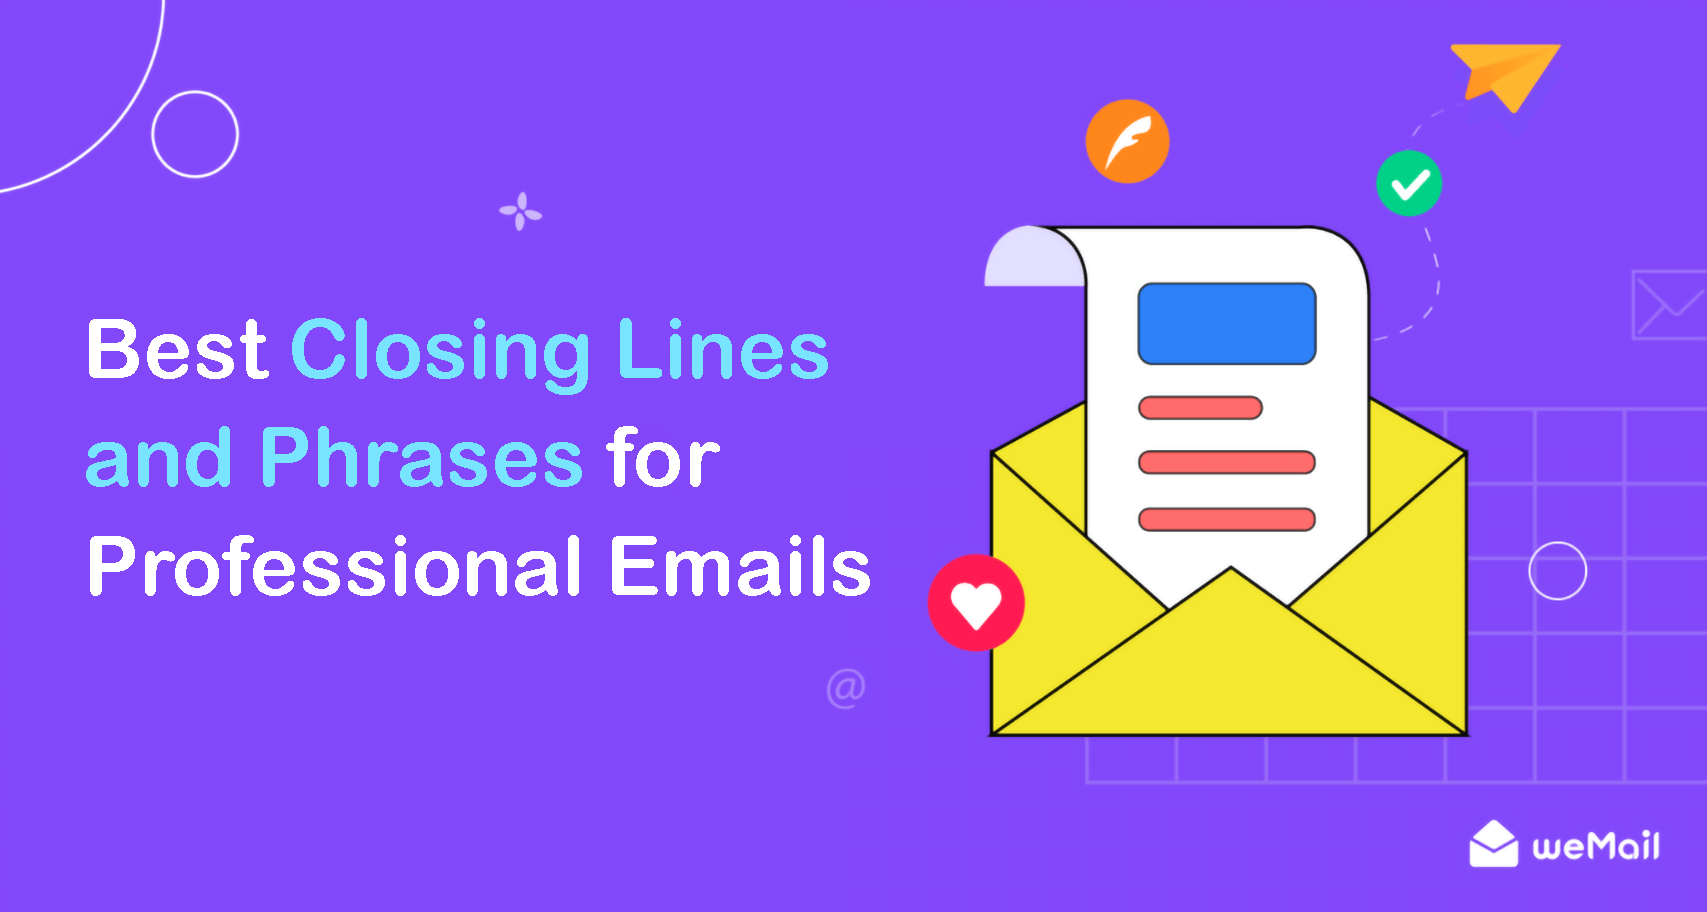 Best Closing Lines and Phrases for Professional Emails